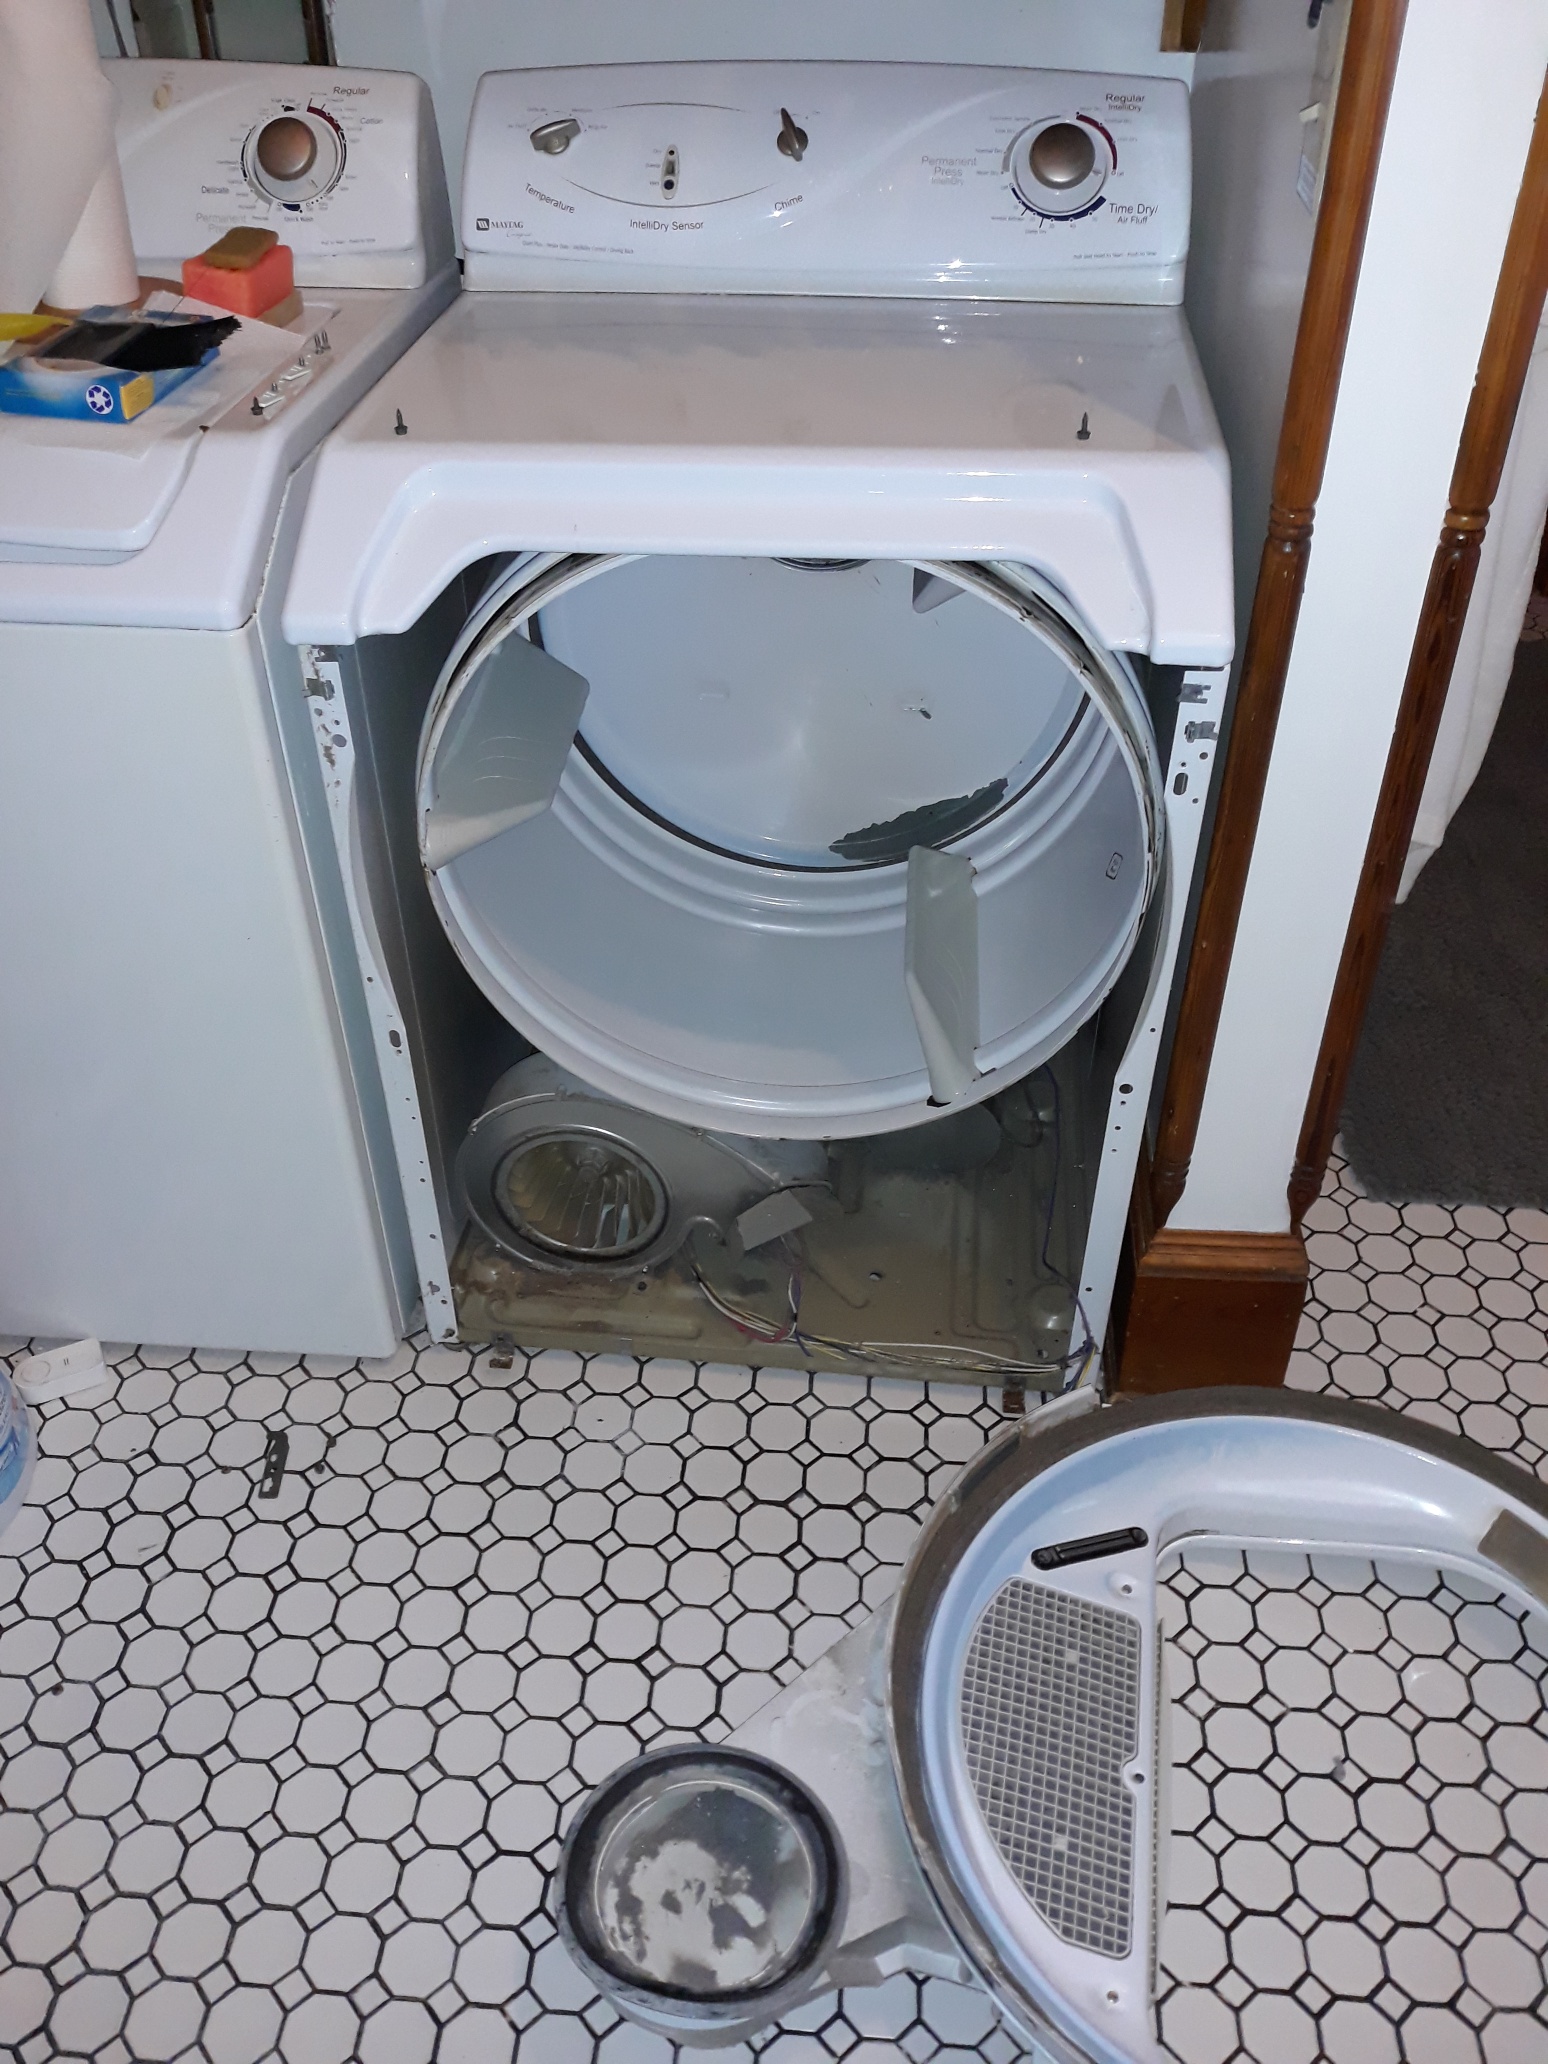 appliance repair dryer repair replacement of the broken tumbler and installation of a new belt hawkes ave sky lake orlando fl 32809